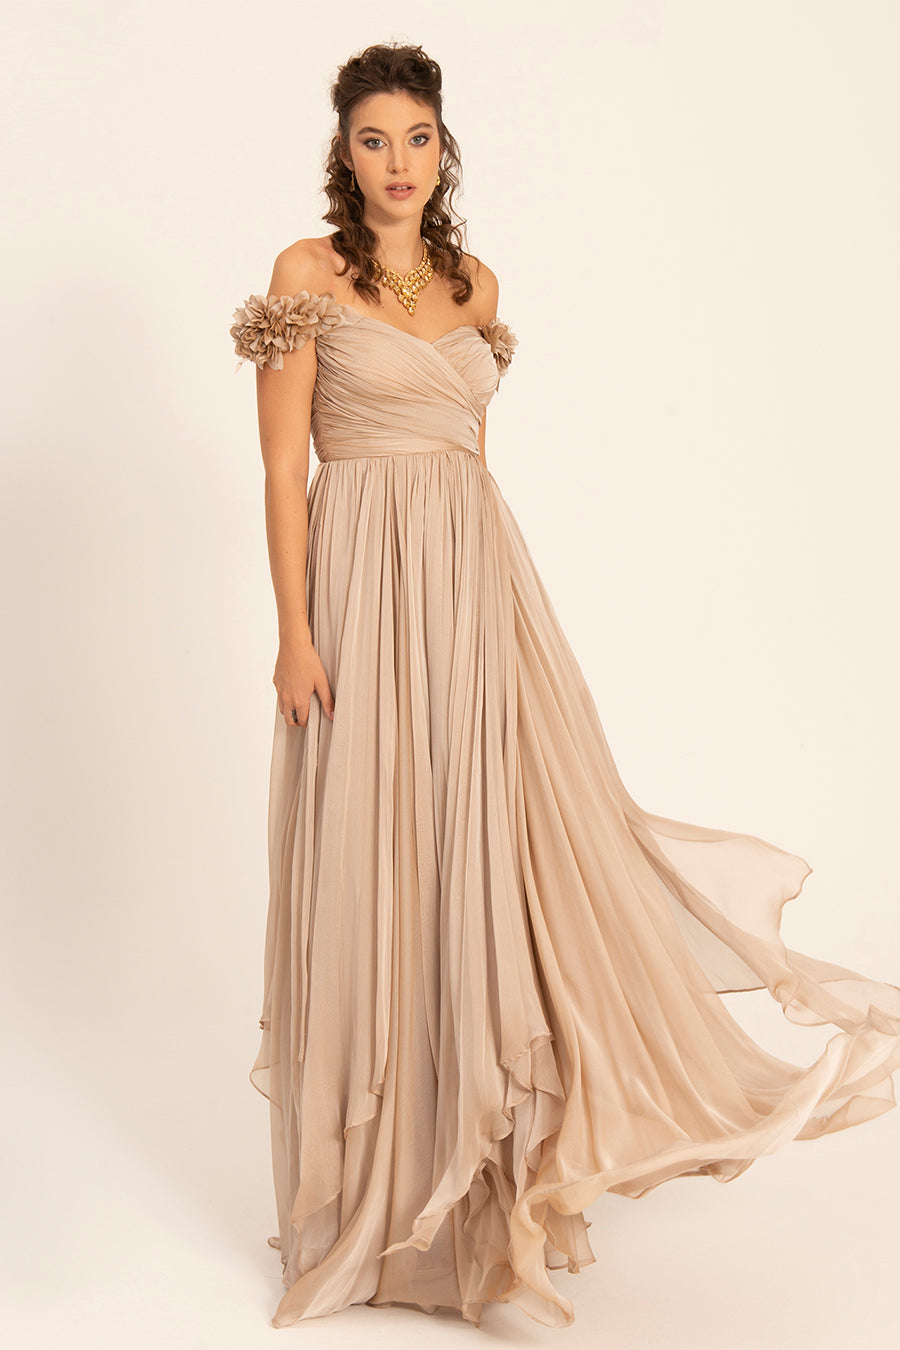 Angel - Mystic Evenings | Evening and Prom Dresses